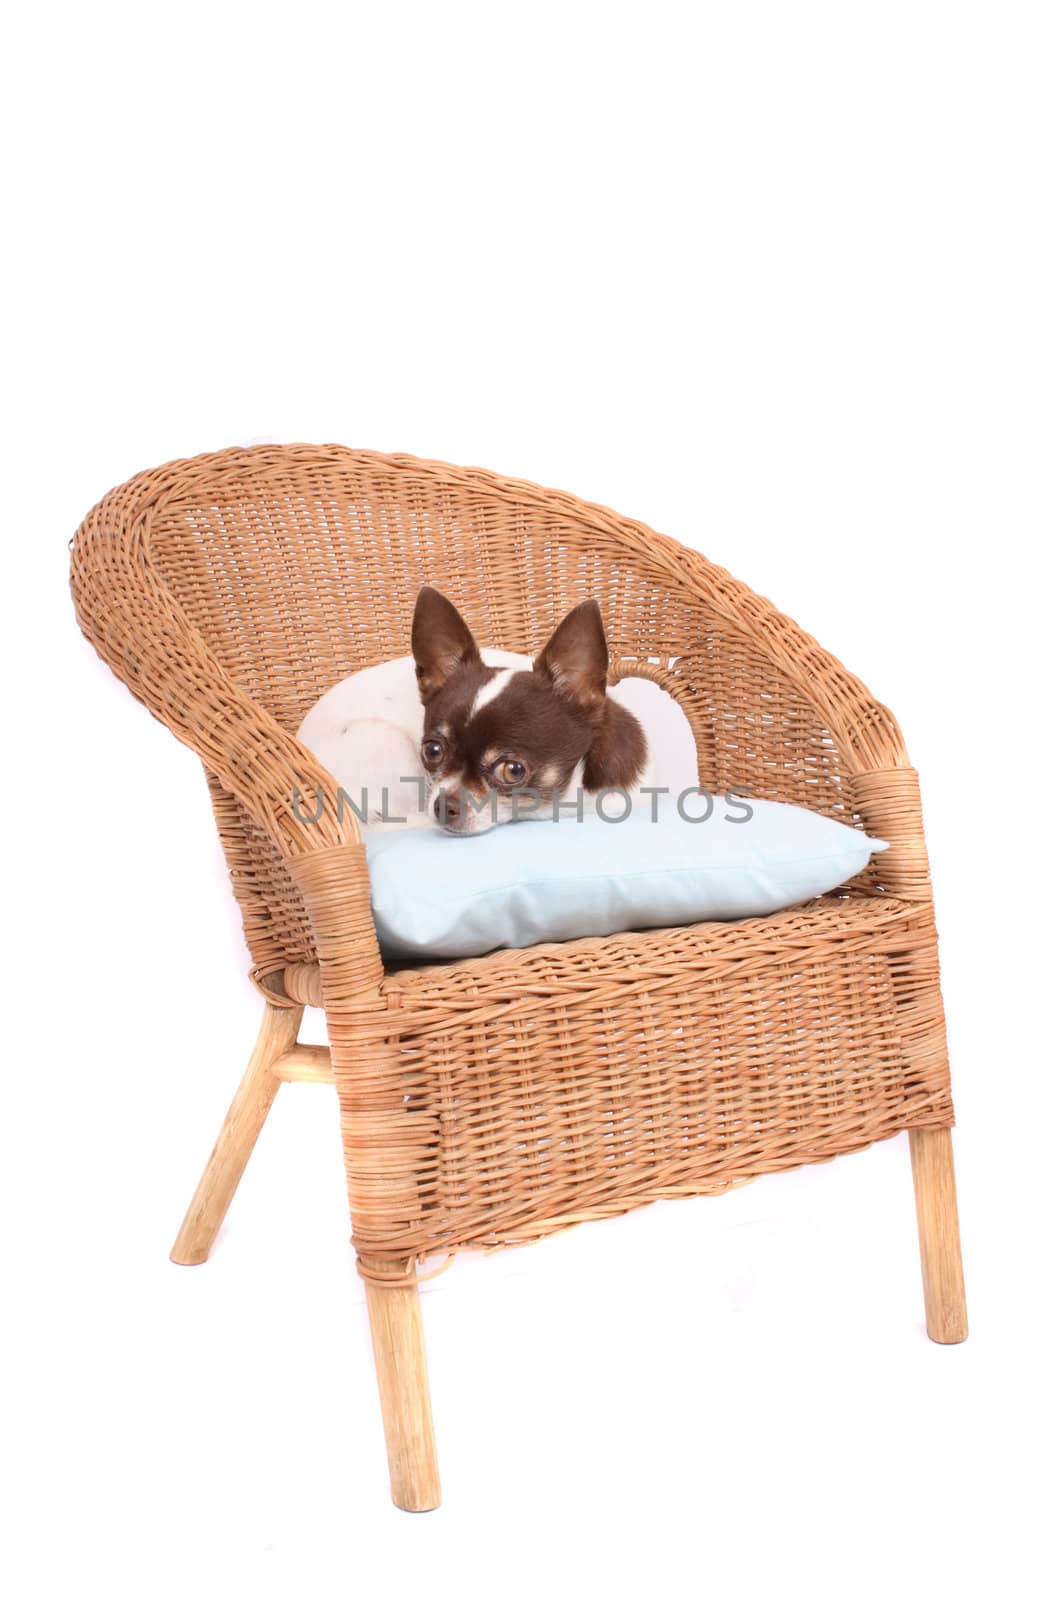 chihuahua is resting on the chair on the white background